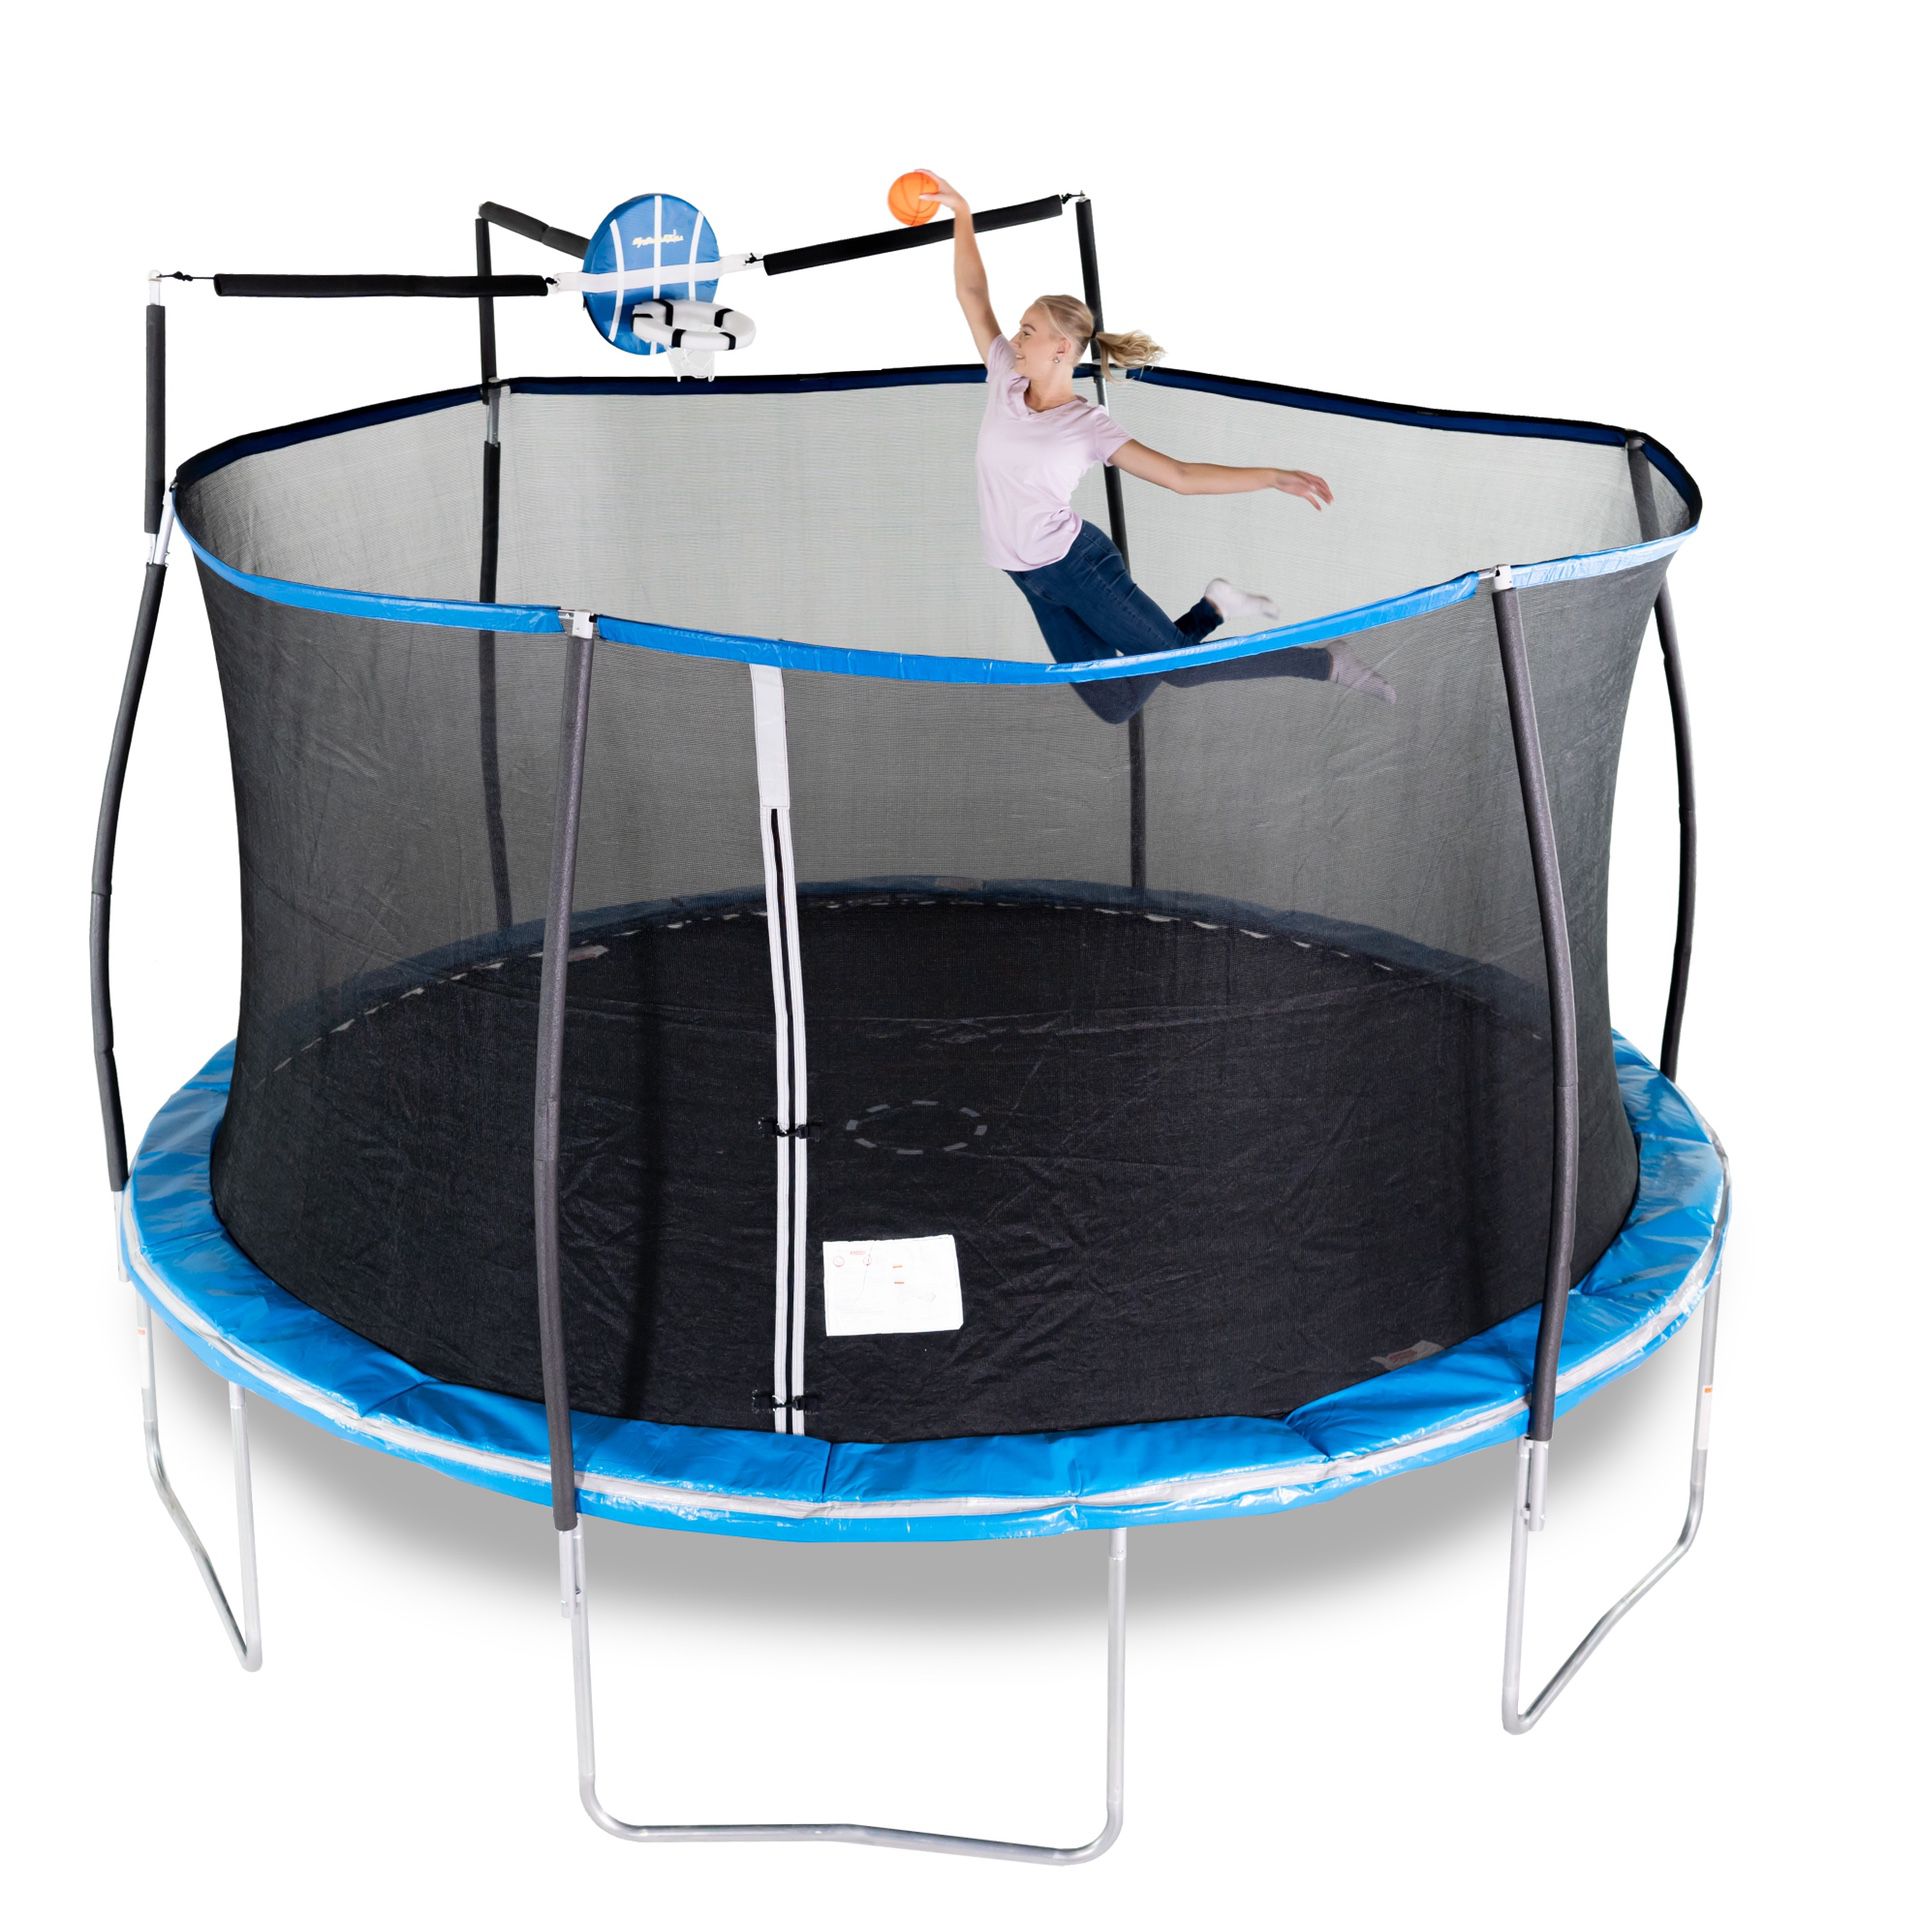 Bounce Pro 14' Trampoline Blue with Safety Enclosure Basketball Hoop